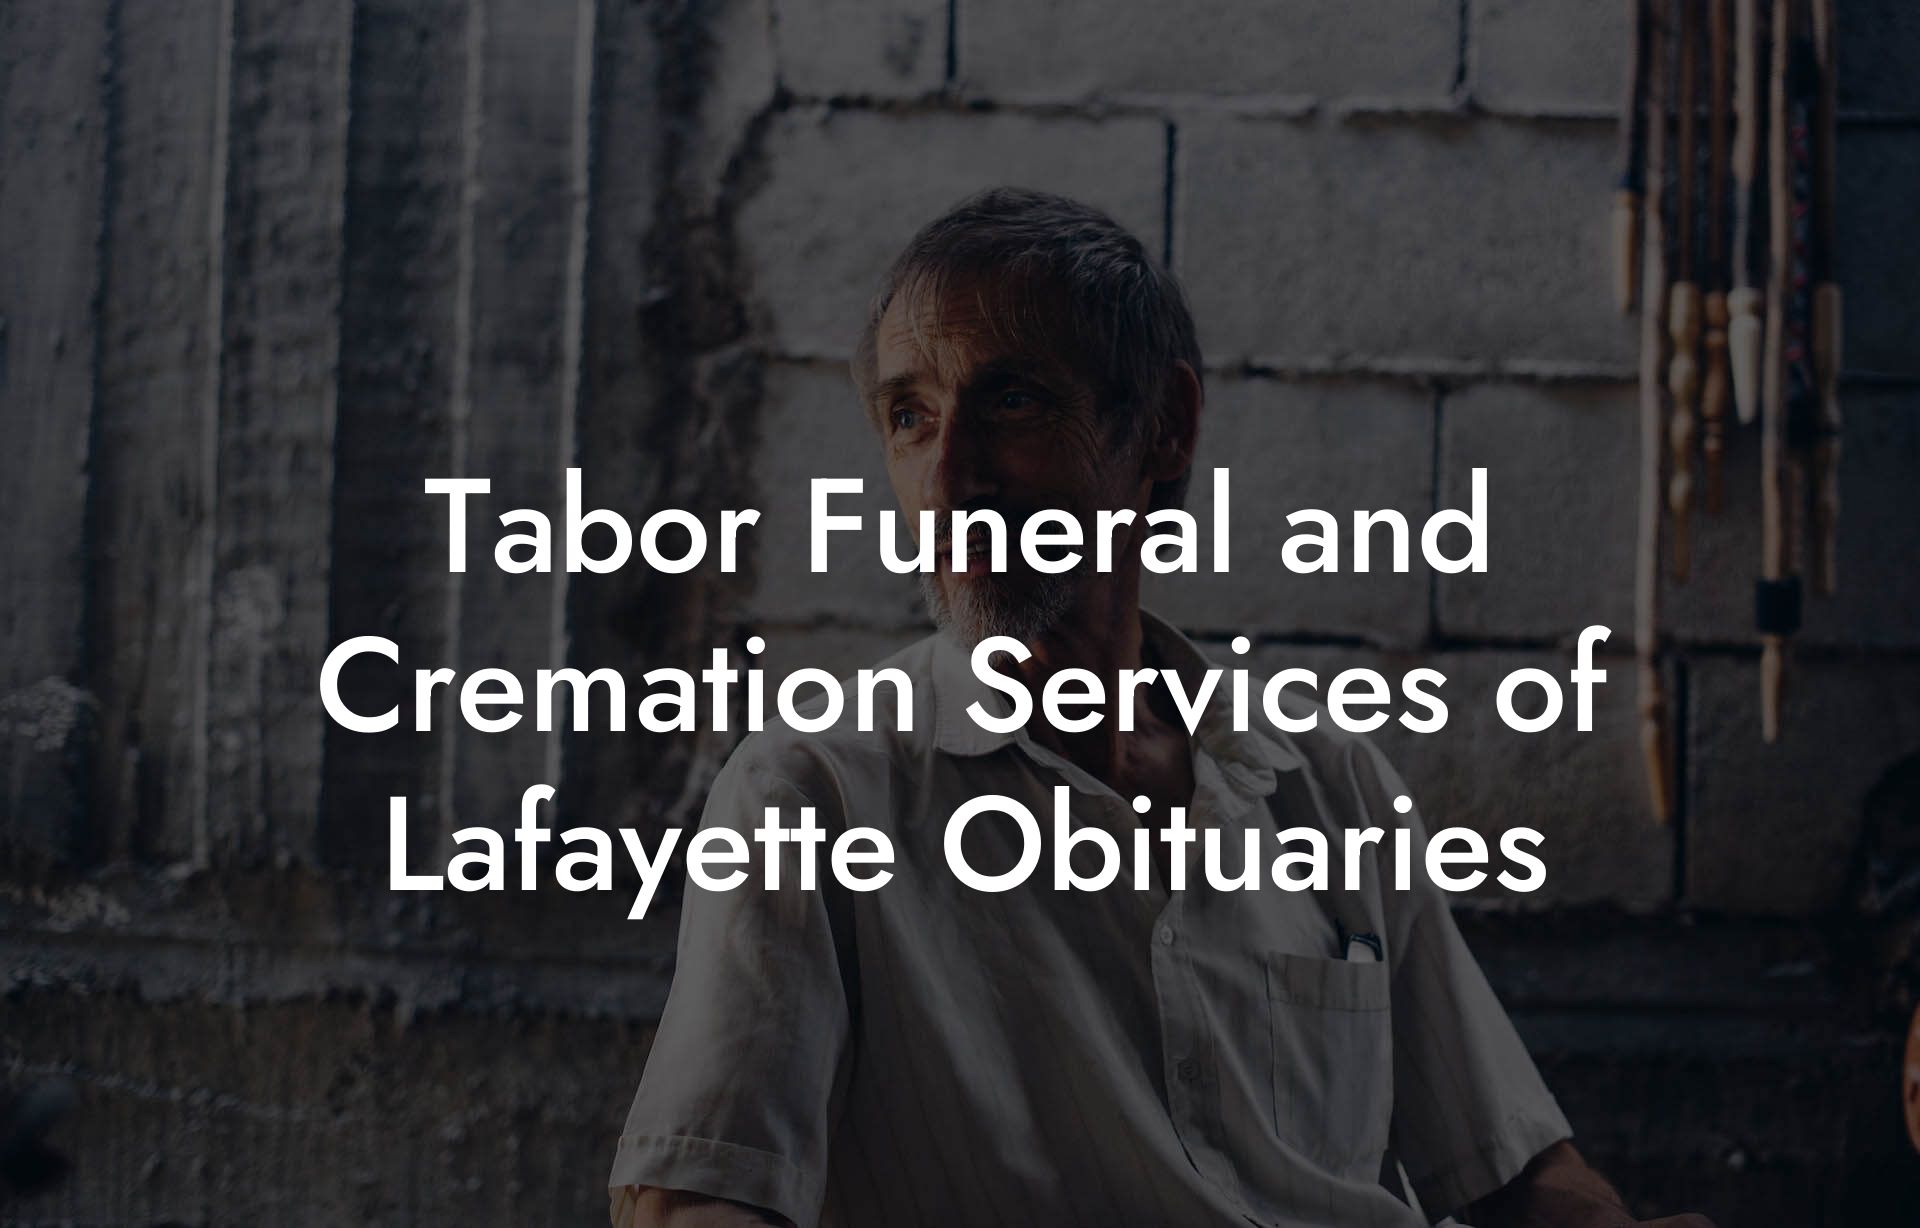 Tabor Funeral and Cremation Services of Lafayette Obituaries